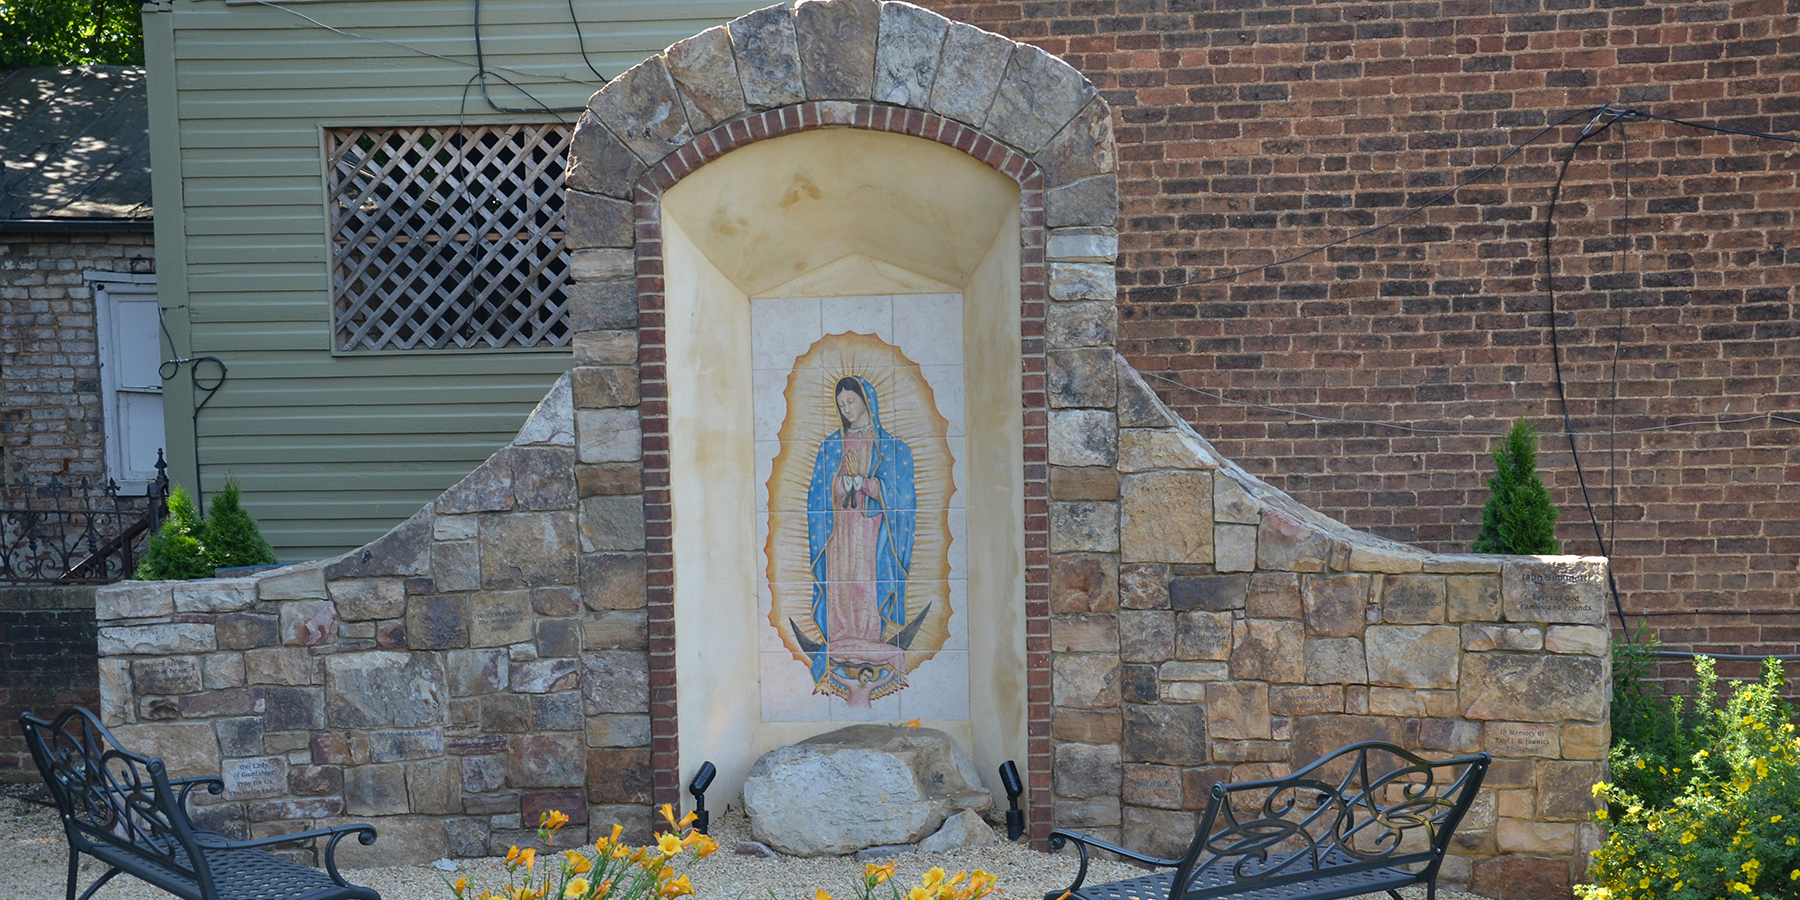 The garden dedicated to Our Lady of Guadalupe, patroness of the unborn